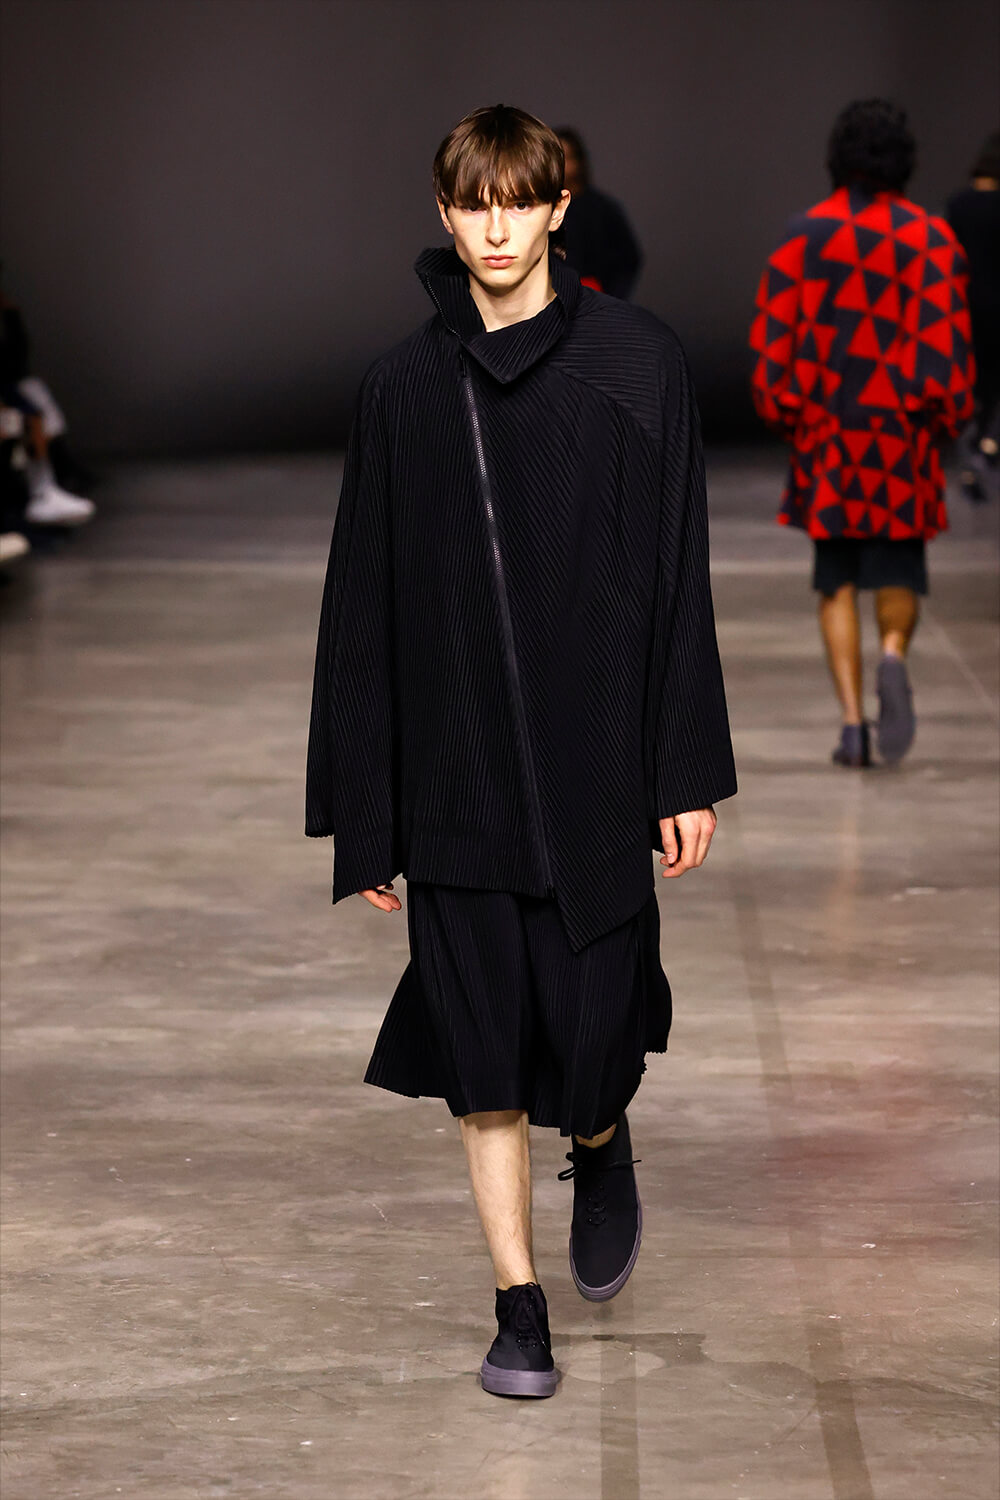 HOMME PLISSE ISSEI MIYAKE 2023aw ブラックニット6枚目以降確認ください